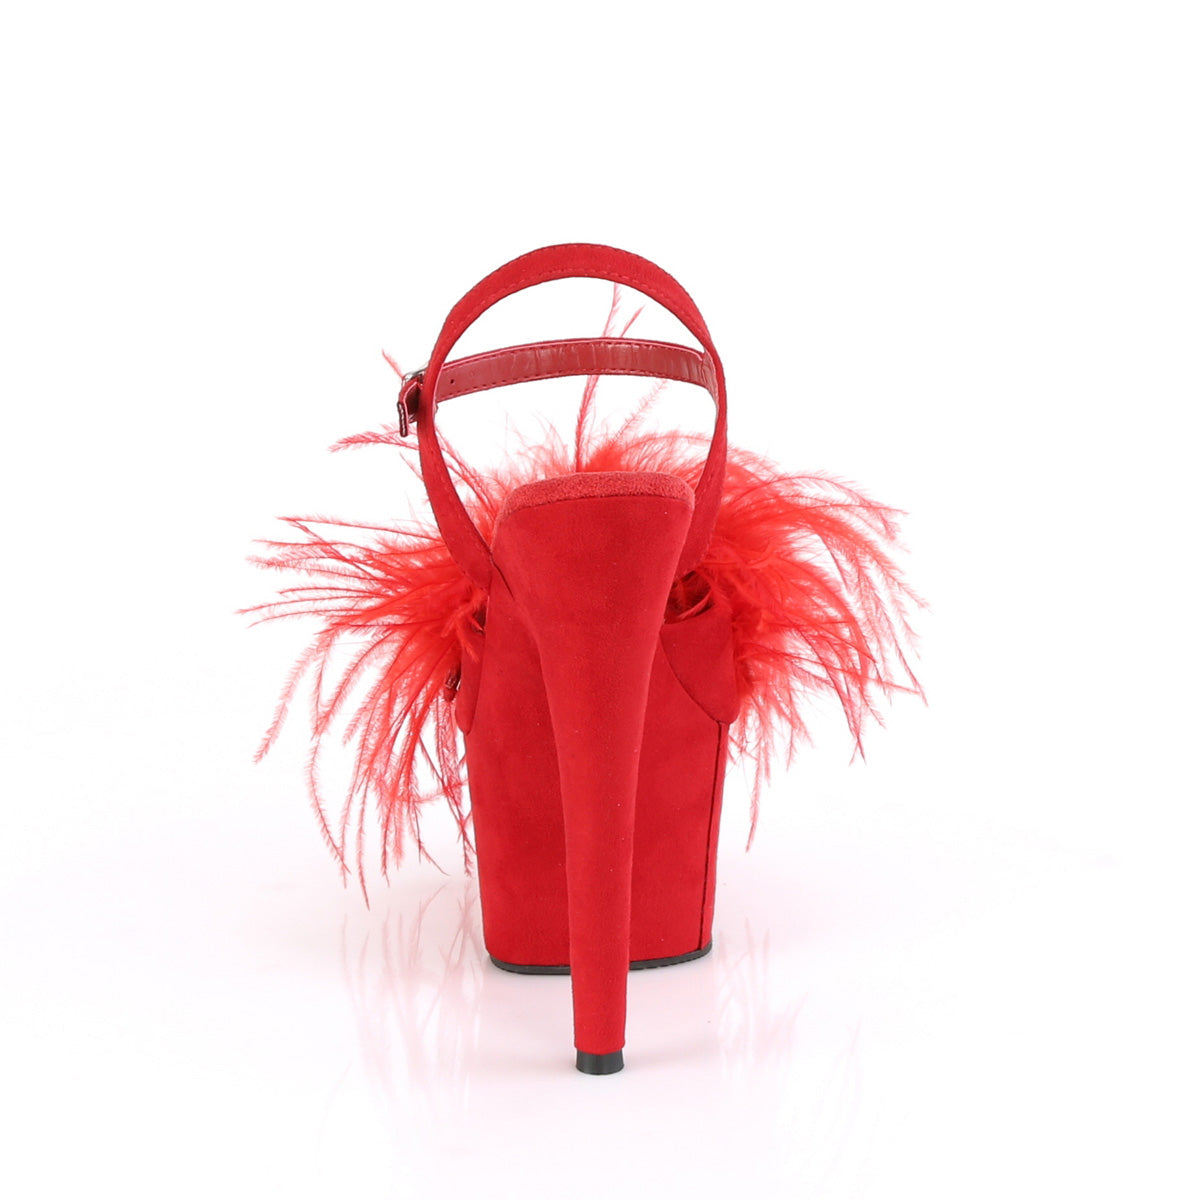 ADORE-709F Red Faux Suede-Feather/Red Faux Suede Platform Sandal Pleaser